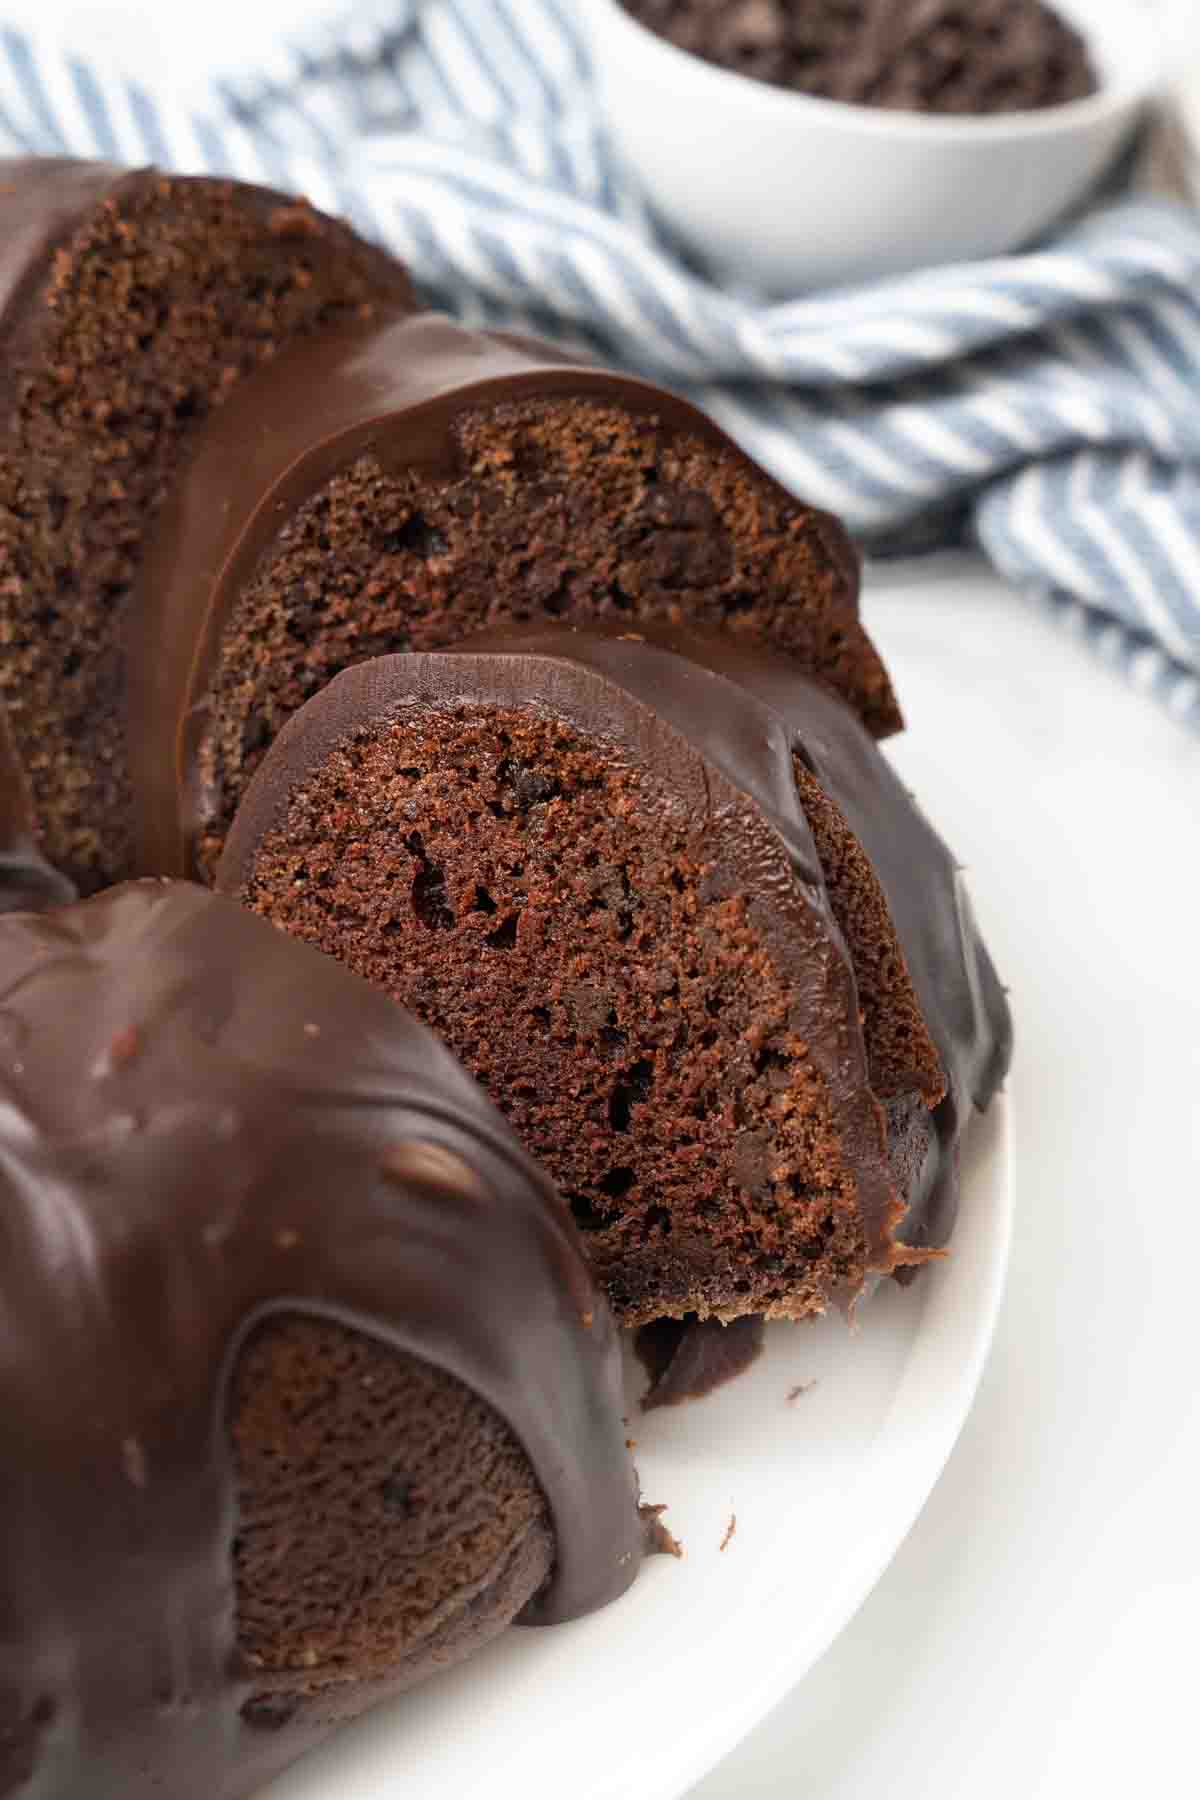 Slice of chocolate bundt cake being taken out of the whole cake.